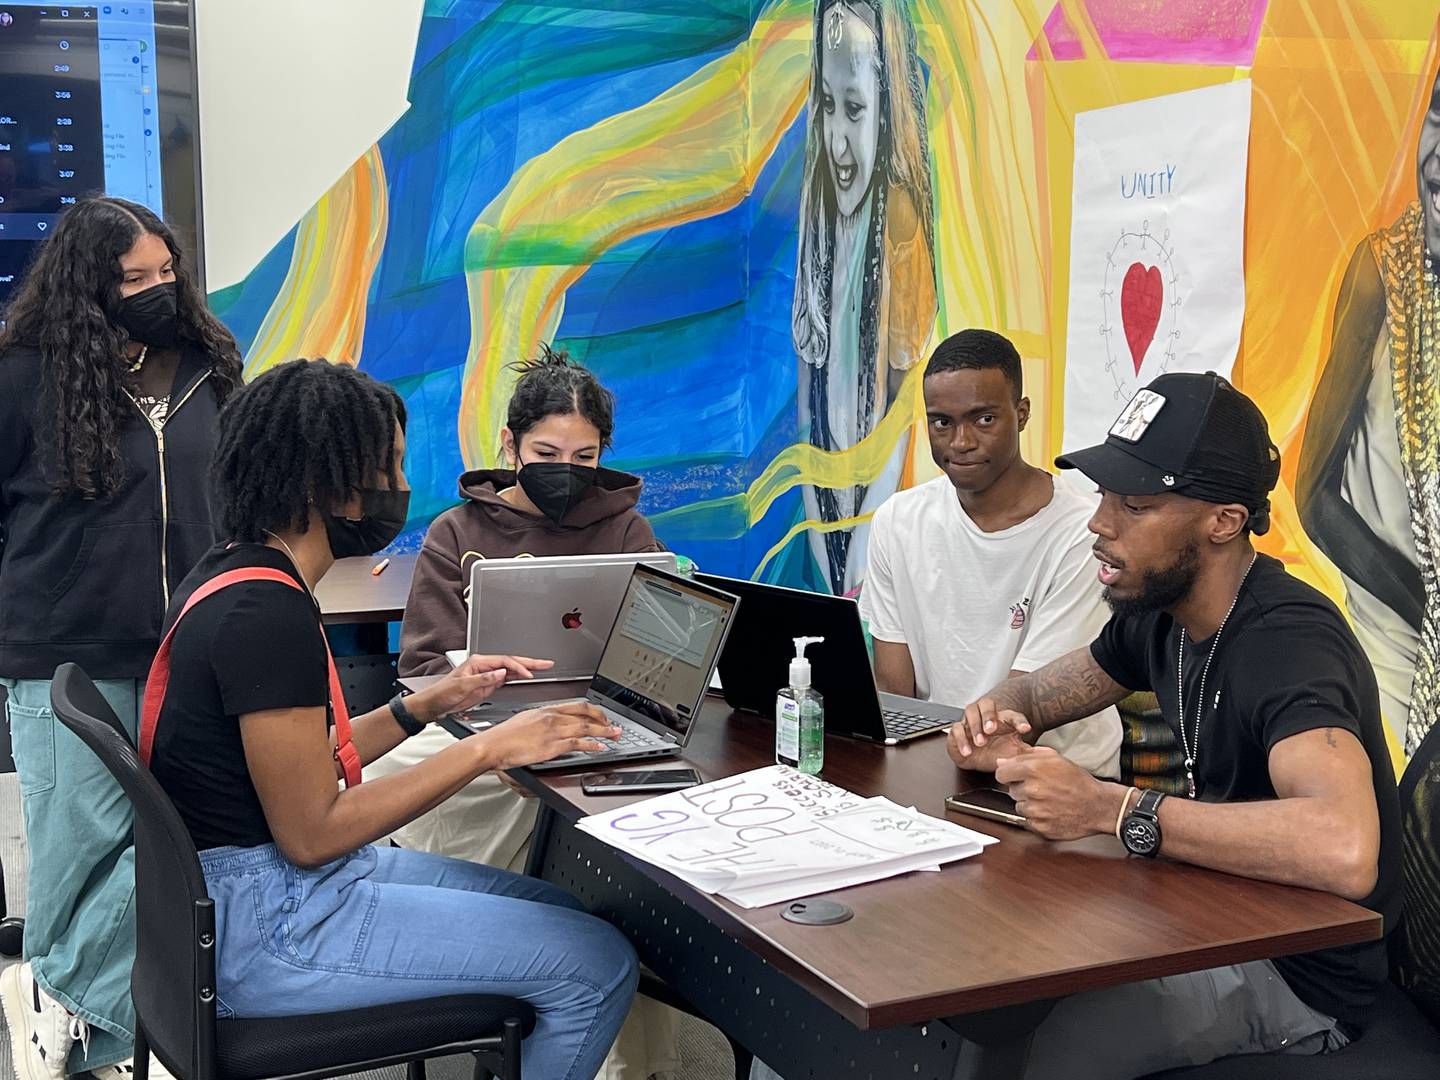 Members of the first cohort of Youth Grantmakers. The group recently awarded $525,000 in grants to 10 organizations focused on helping young people in the city.